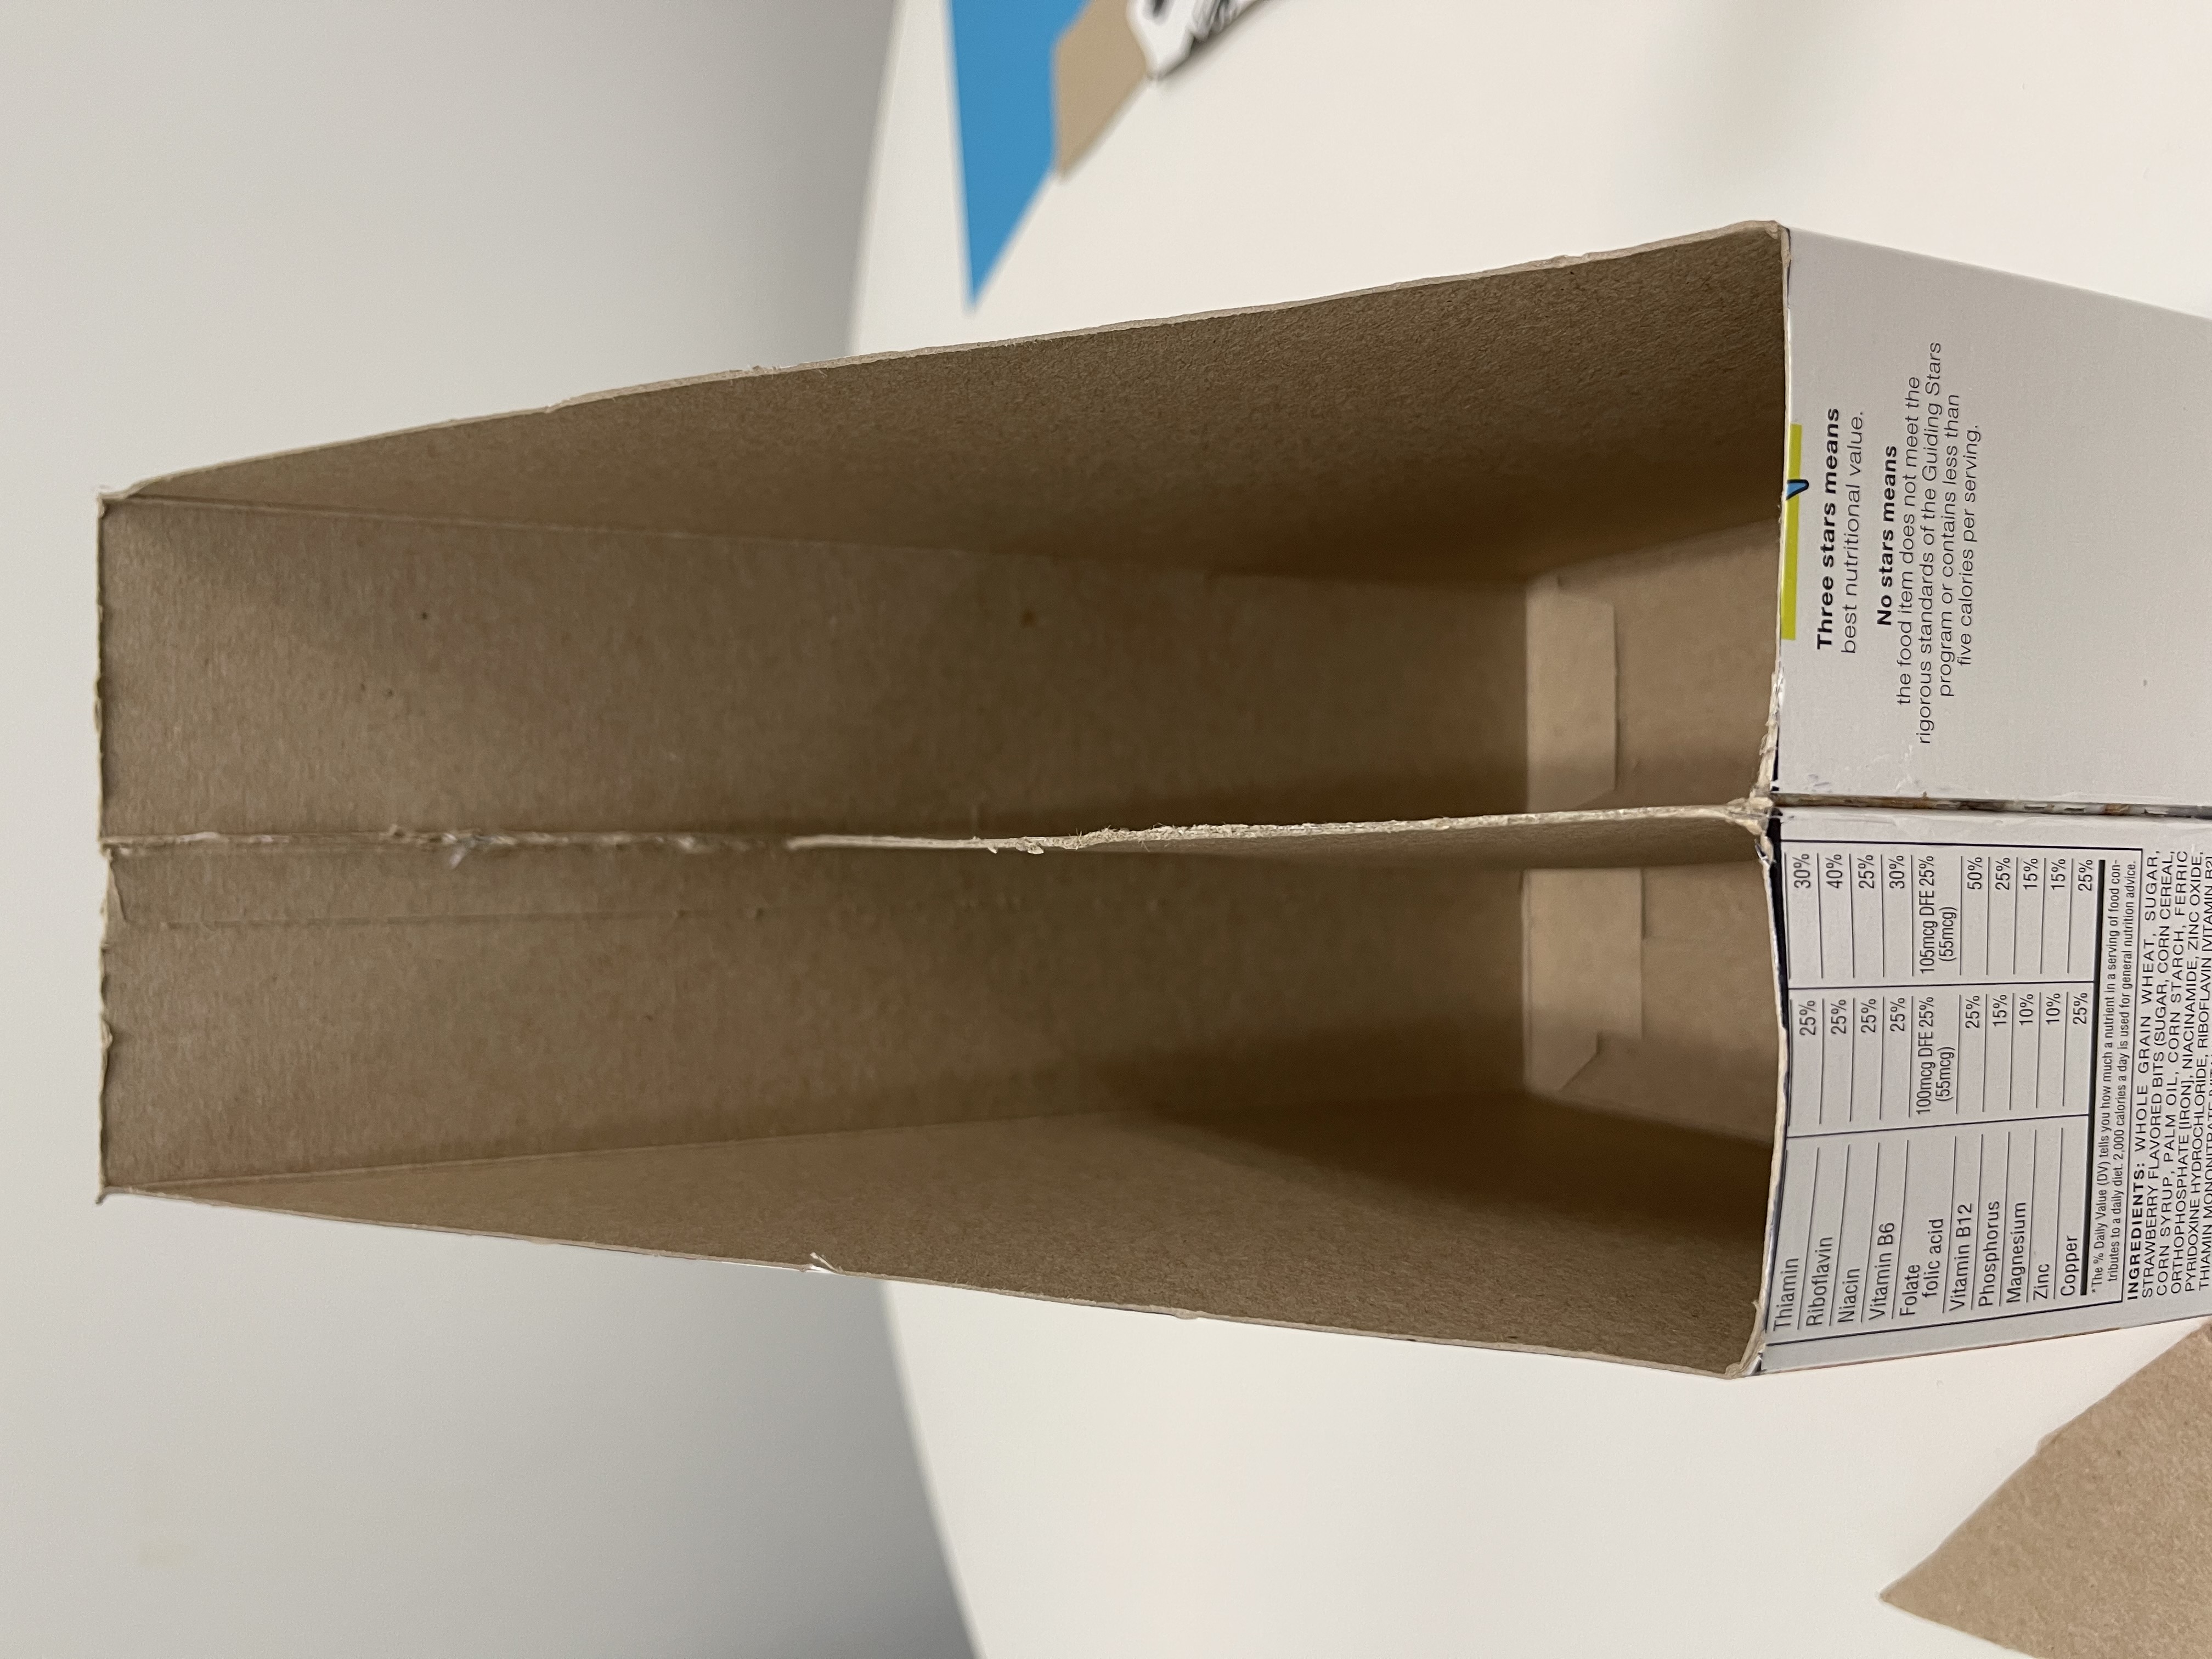 two cut cereal boxes with cardboard showing